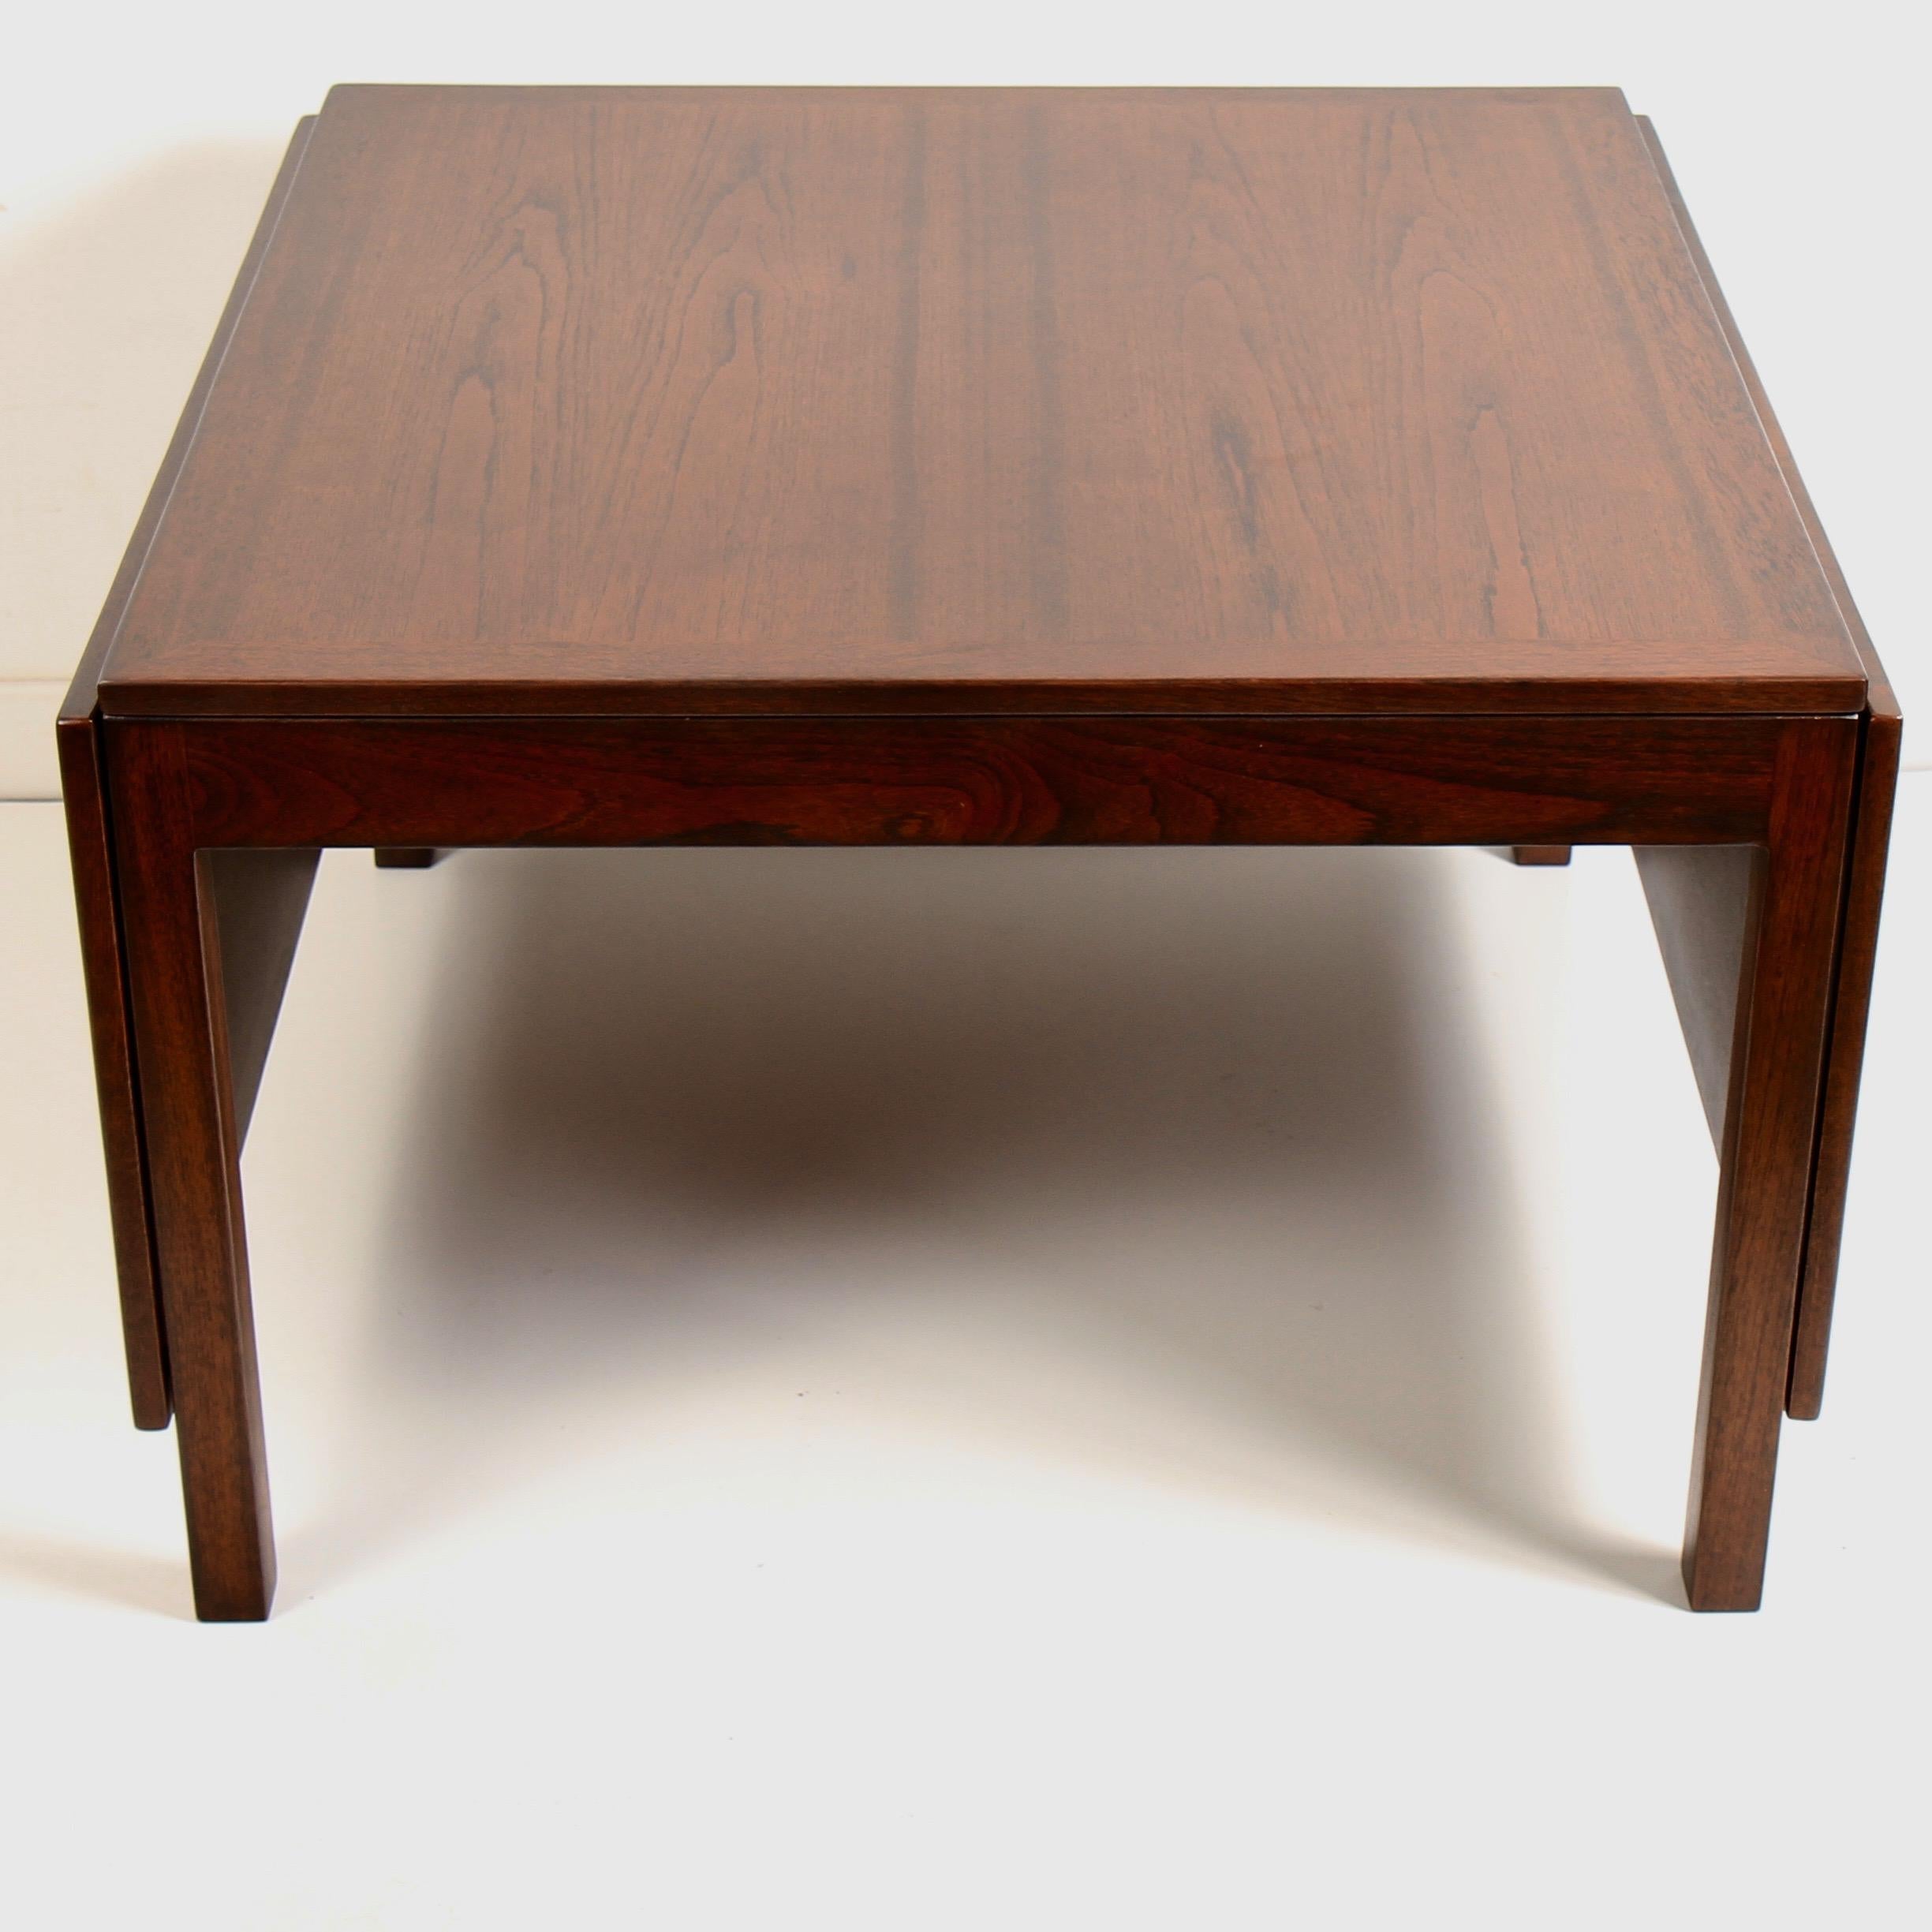 Rare drop teak leaf coffee table by Børge Mogensen for Fredericia Stolefabrik. Professionally refinished (first time) to the original walnut finish. This is a practical coffee table for small spaces that can expand for entertaining extra company.